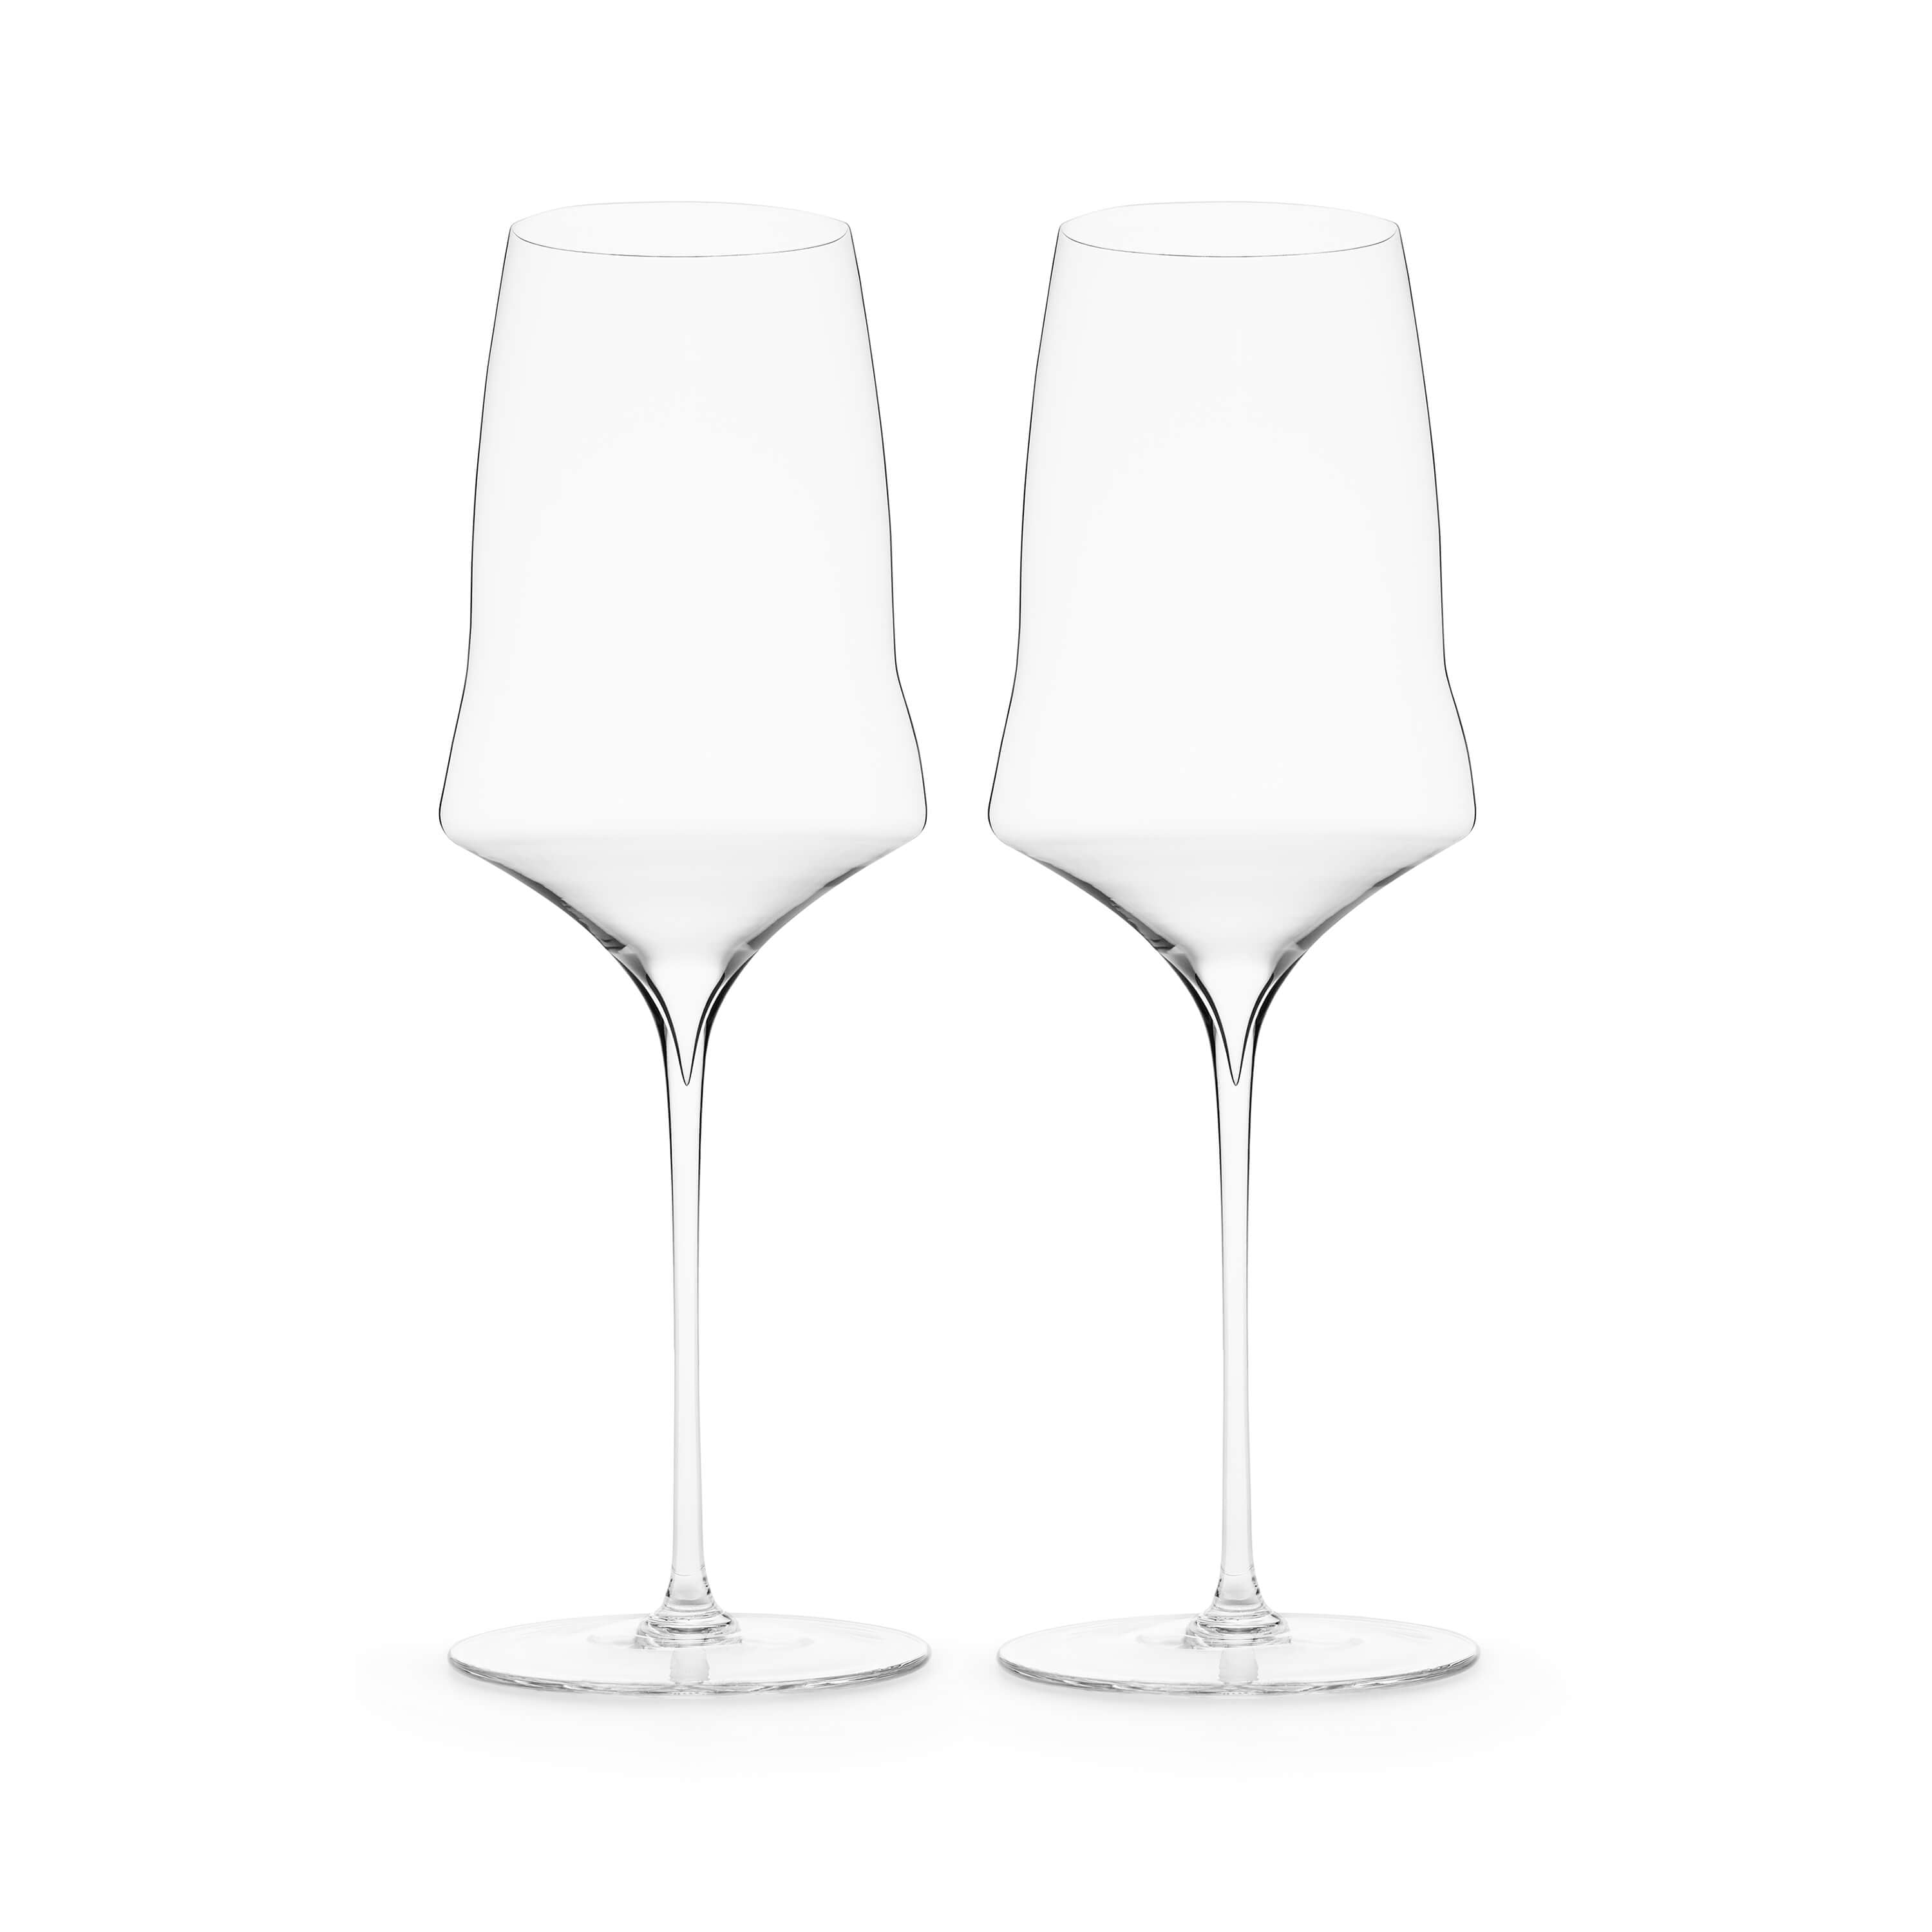 Two white wine glasses by Josephinenhütte